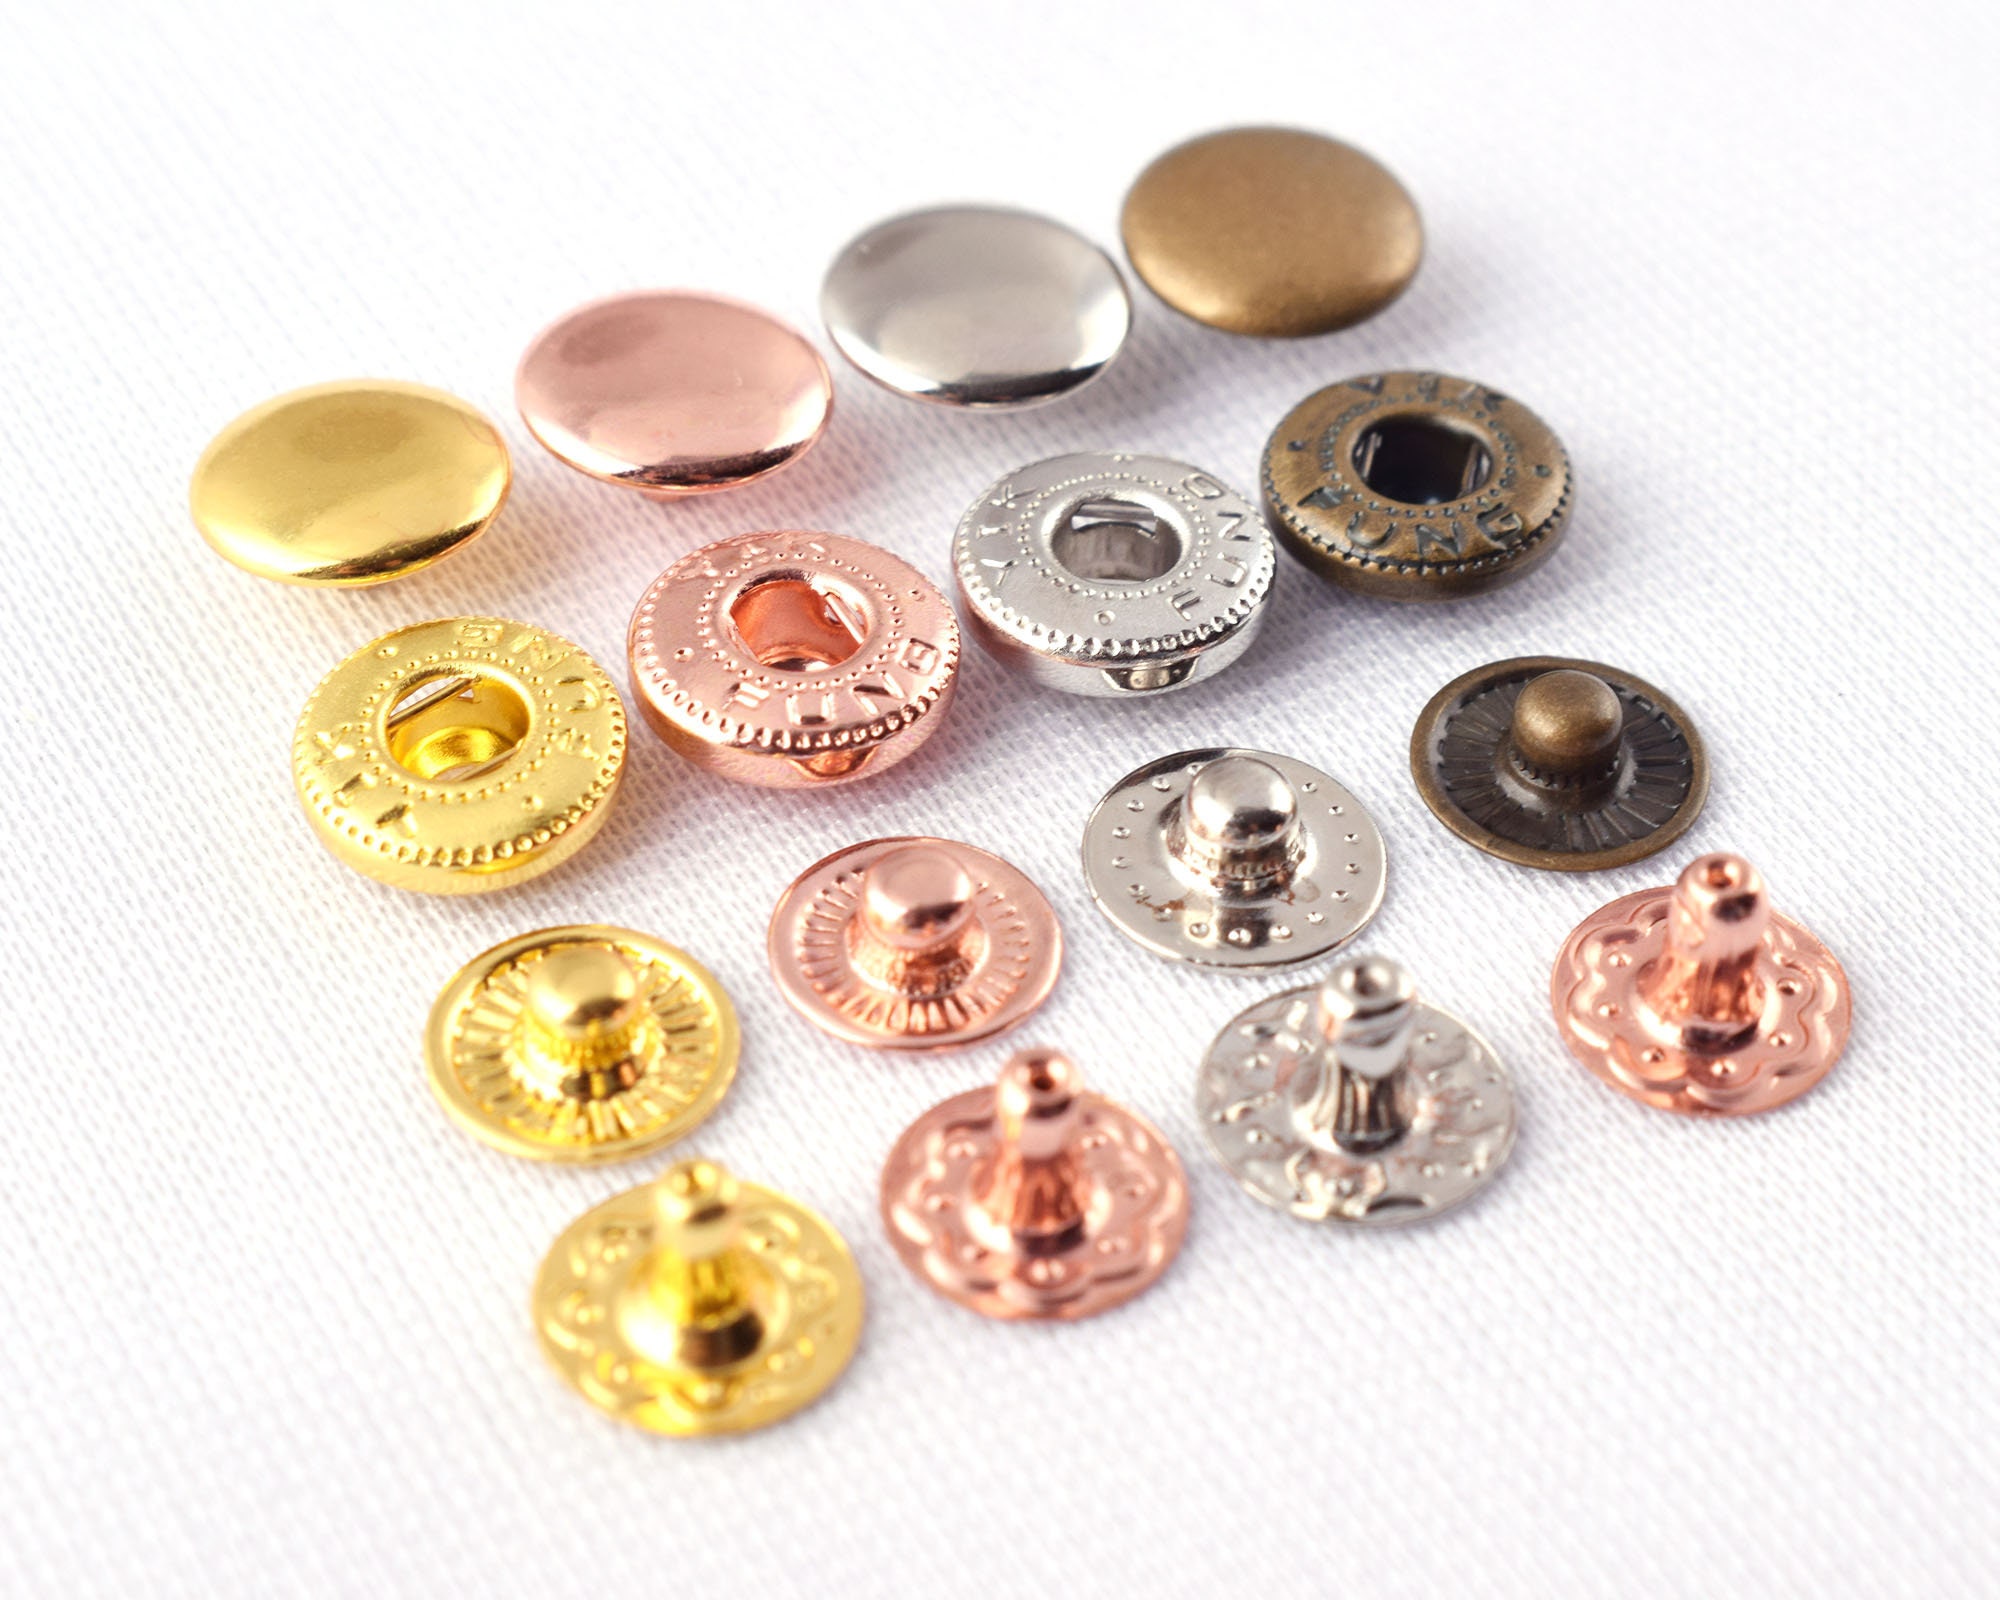 Metal Leather Snap Buttons 12mm Spring Snap Fasteners Kit Press Studs  Clothing Snaps Button Clothing Canvas Leather Craft Sewing 20/50 Sets -   Israel